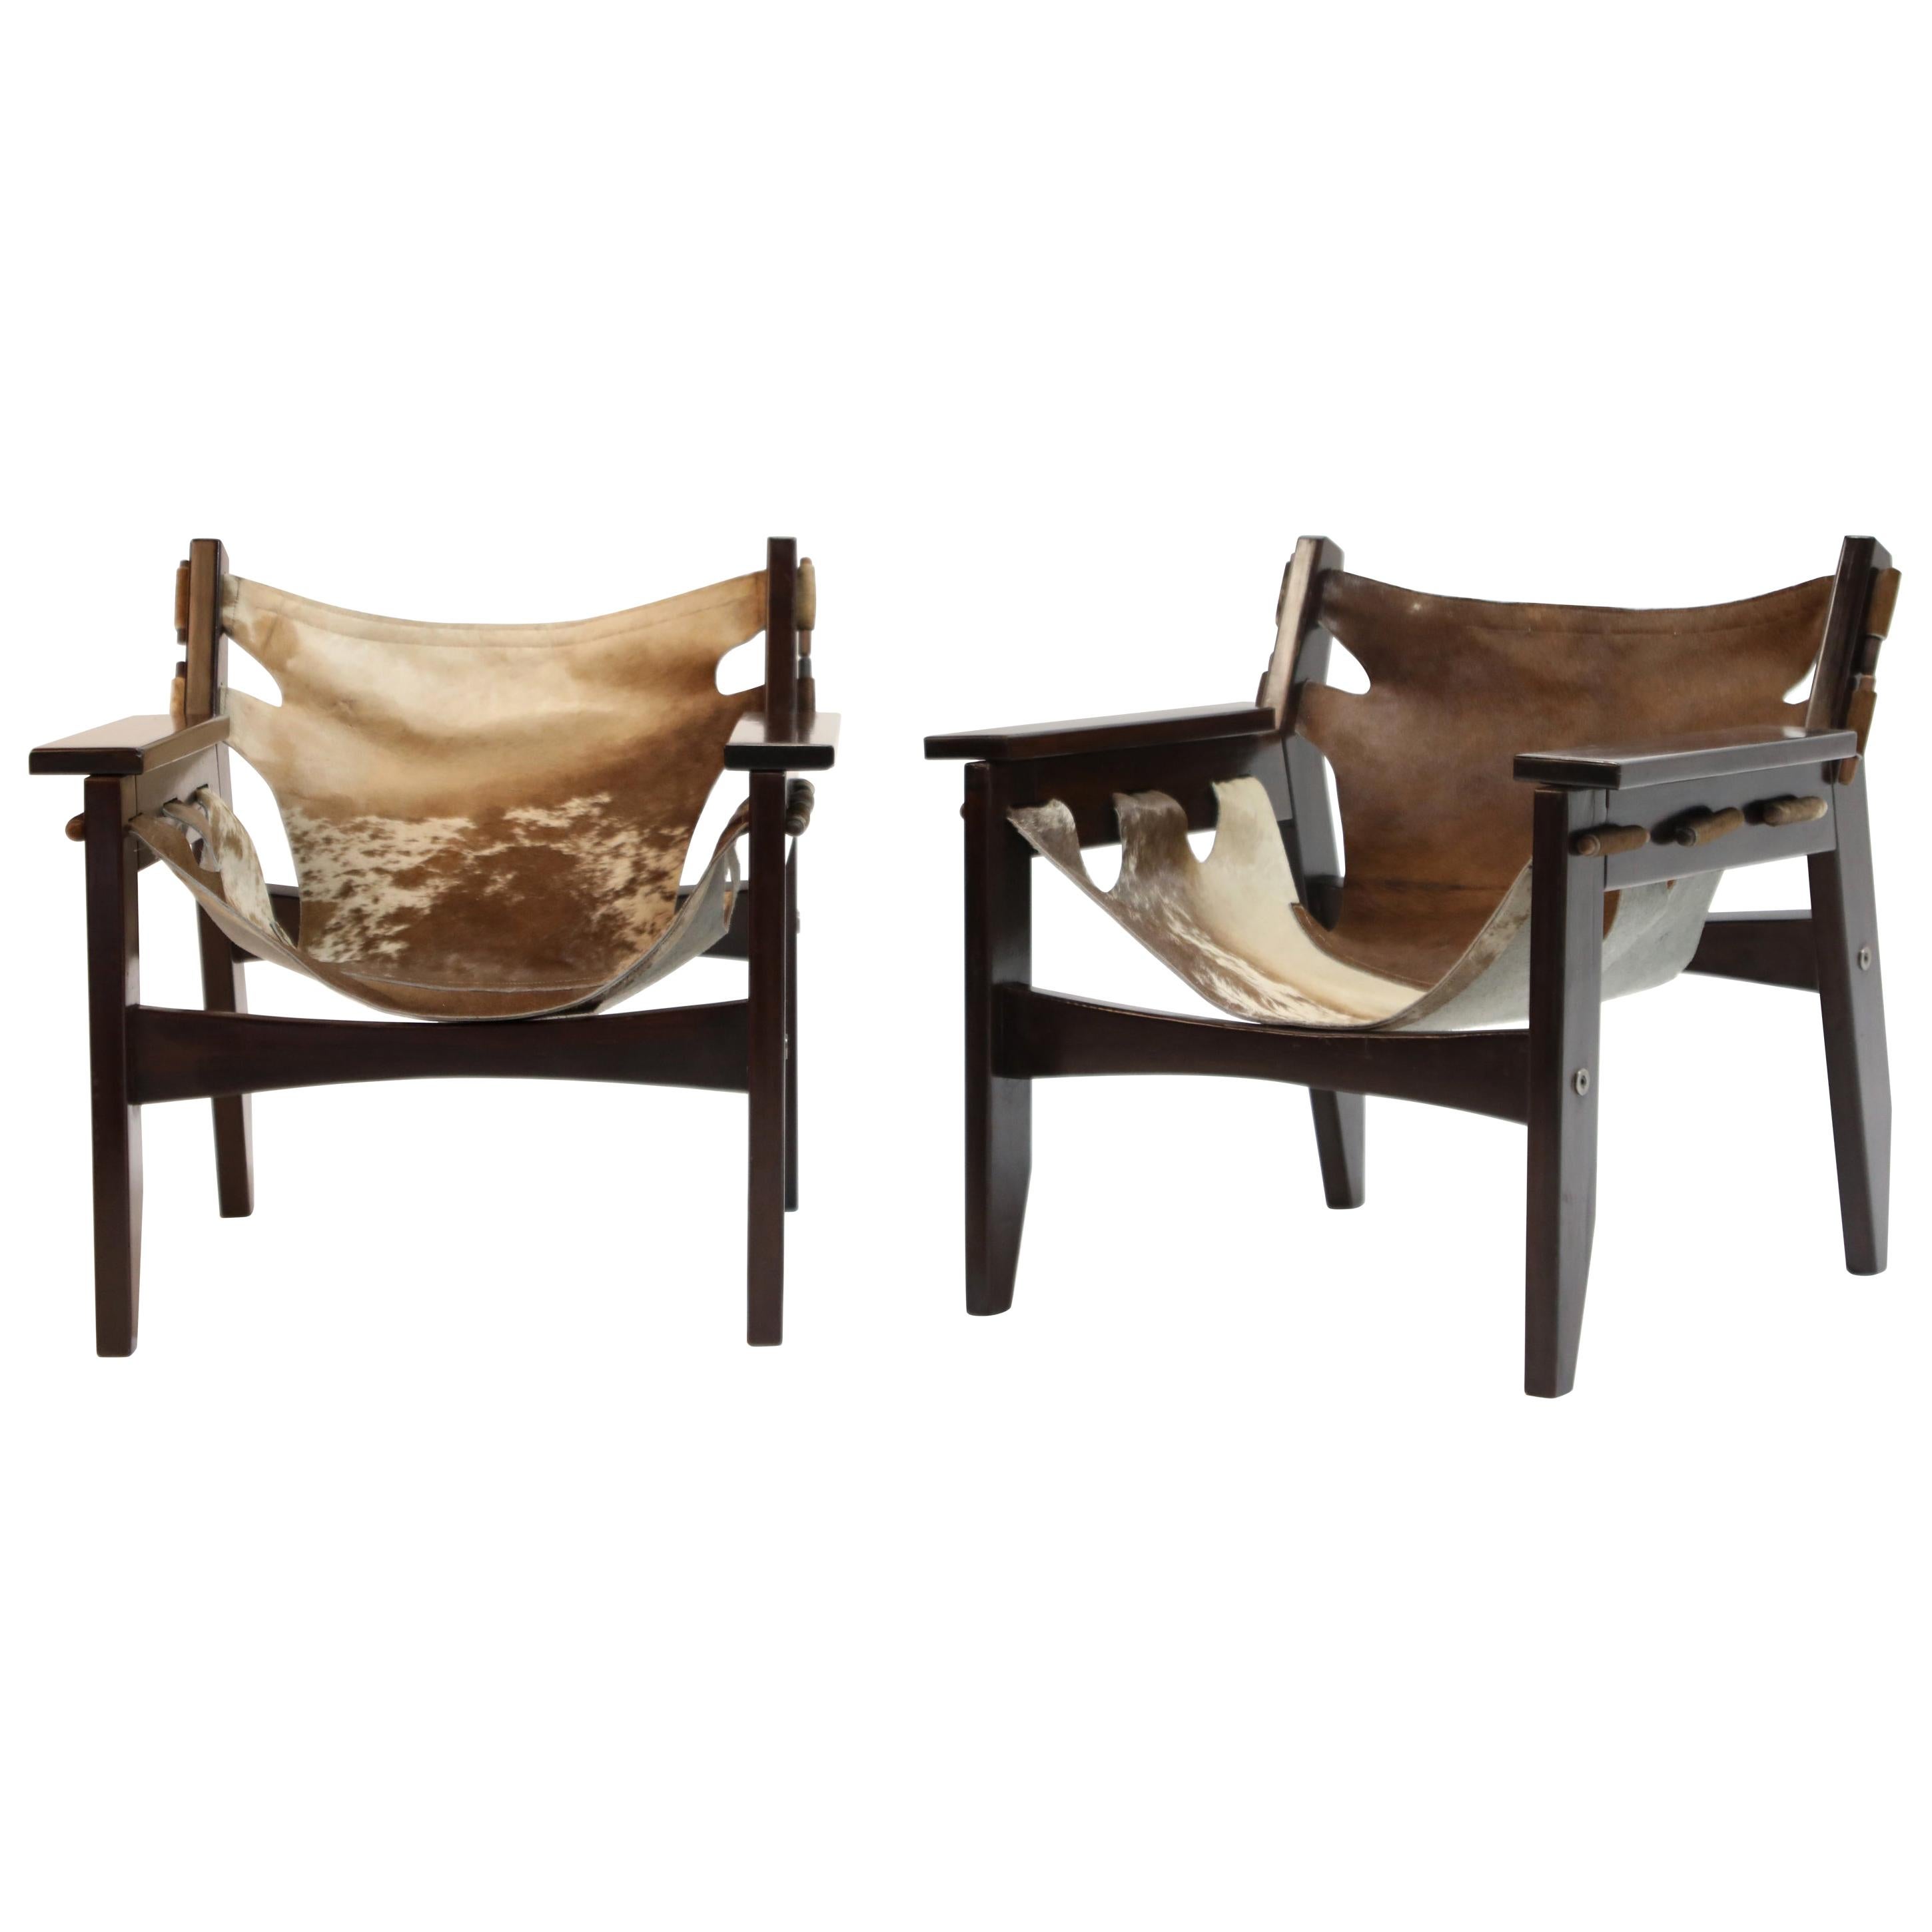 A charming pair and wonderful examples of 'Kilin' chairs by famed Brazilian modern designer Sergio Rodrigues for Oca in 1970s Brazil. Frame is a succulent Brazilian Rosewood and the leather slings are hair-on cowhide. The pattern on each sling is